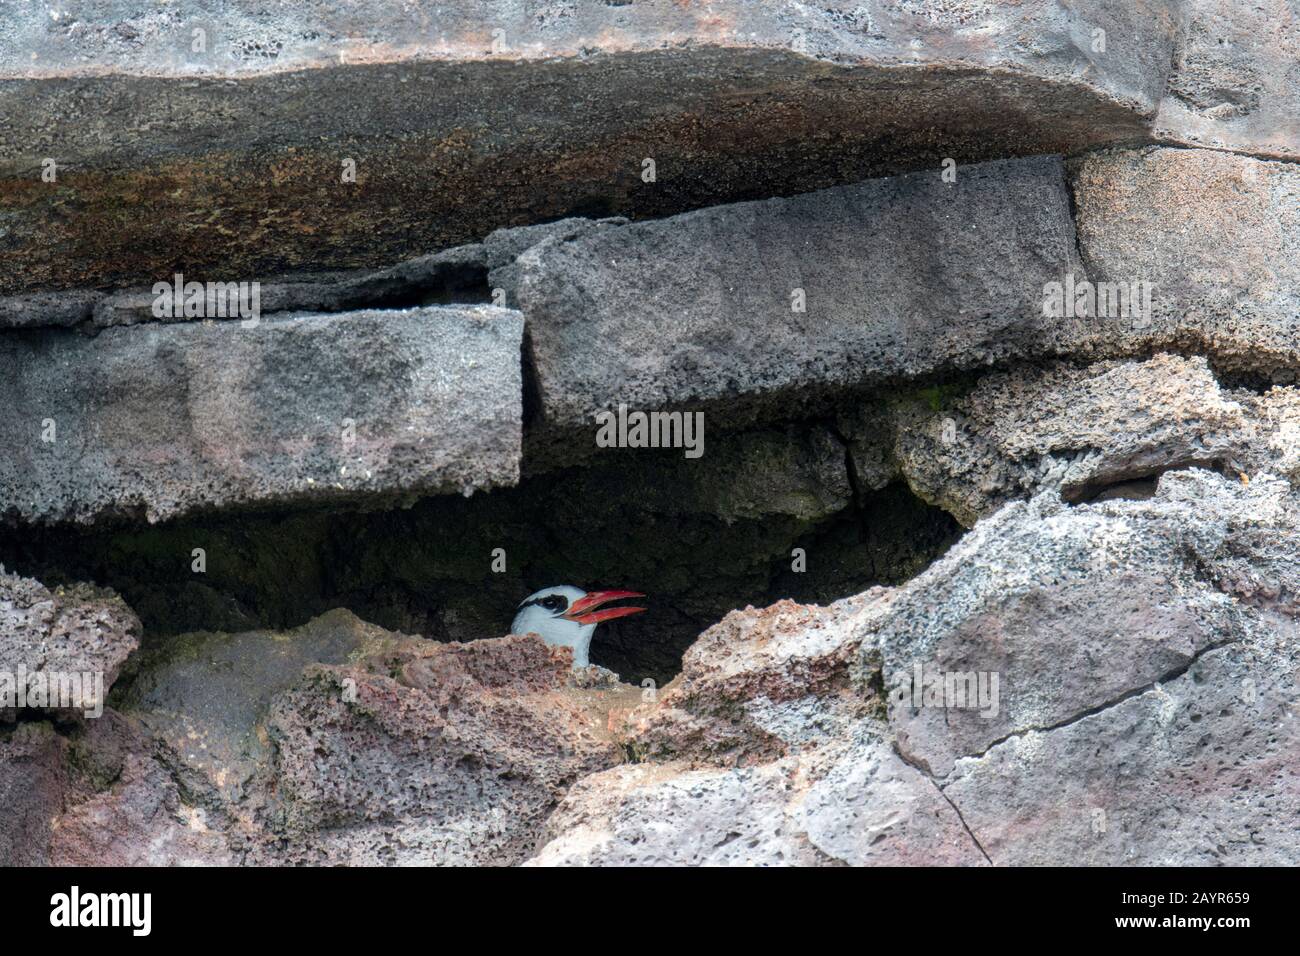 A Red-billed tropicbird (Phaethon aethereus mesonauta)  is nesting in a cliff on Genovesa Island (Tower Island) in the Galapagos Islands, Ecuador. Stock Photo